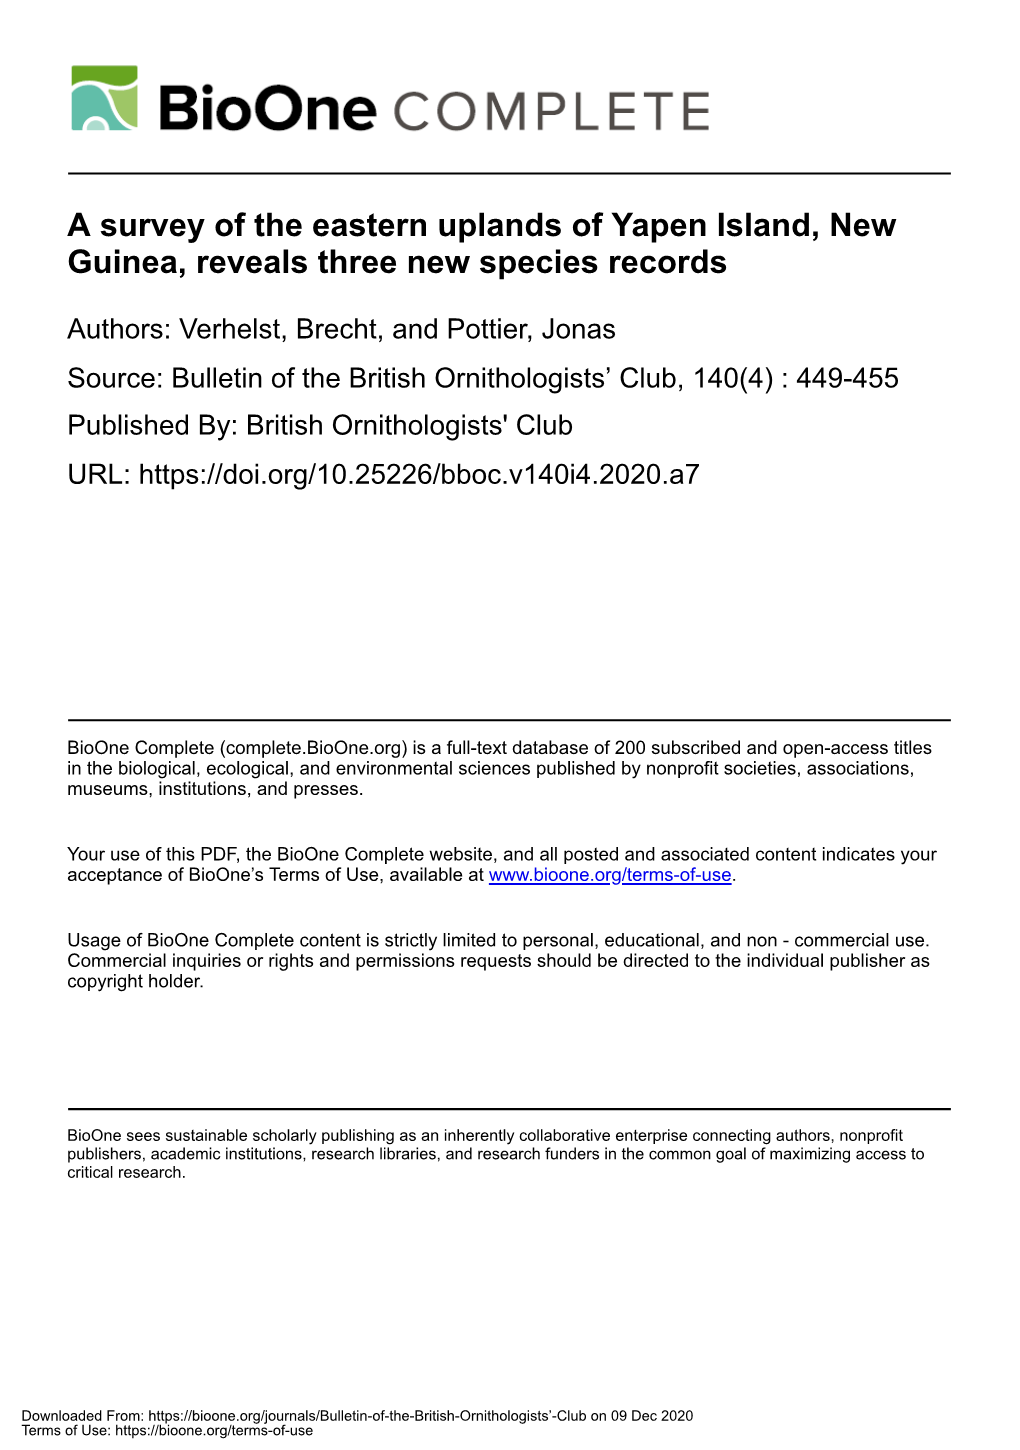 A Survey of the Eastern Uplands of Yapen Island, New Guinea, Reveals Three New Species Records